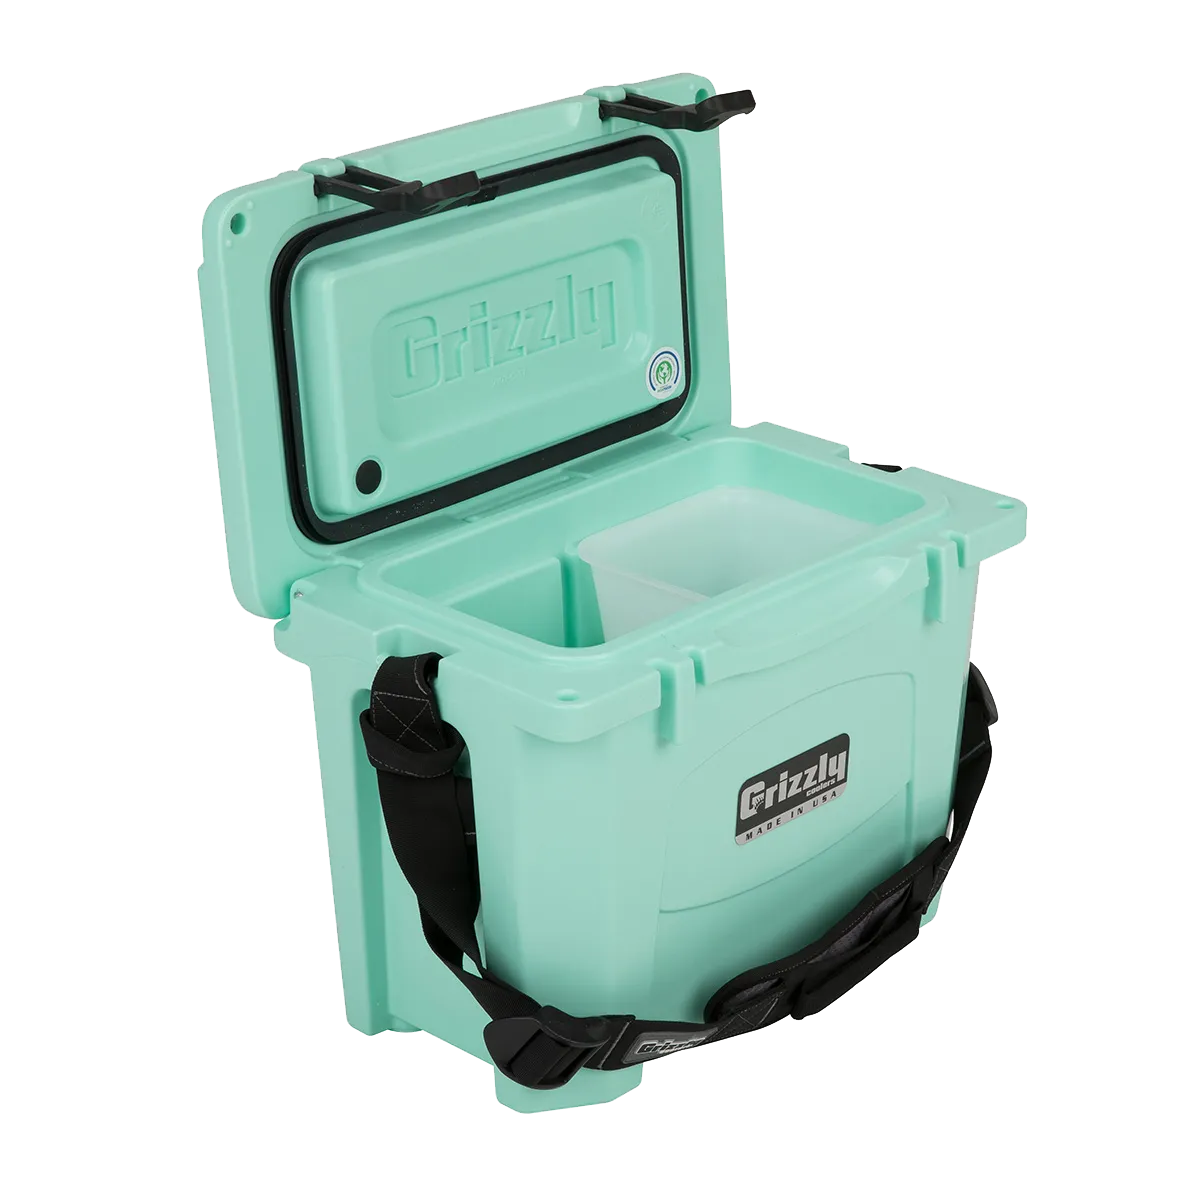 Customized Grizzly Cooler 15 qt Coolers from Grizzly 